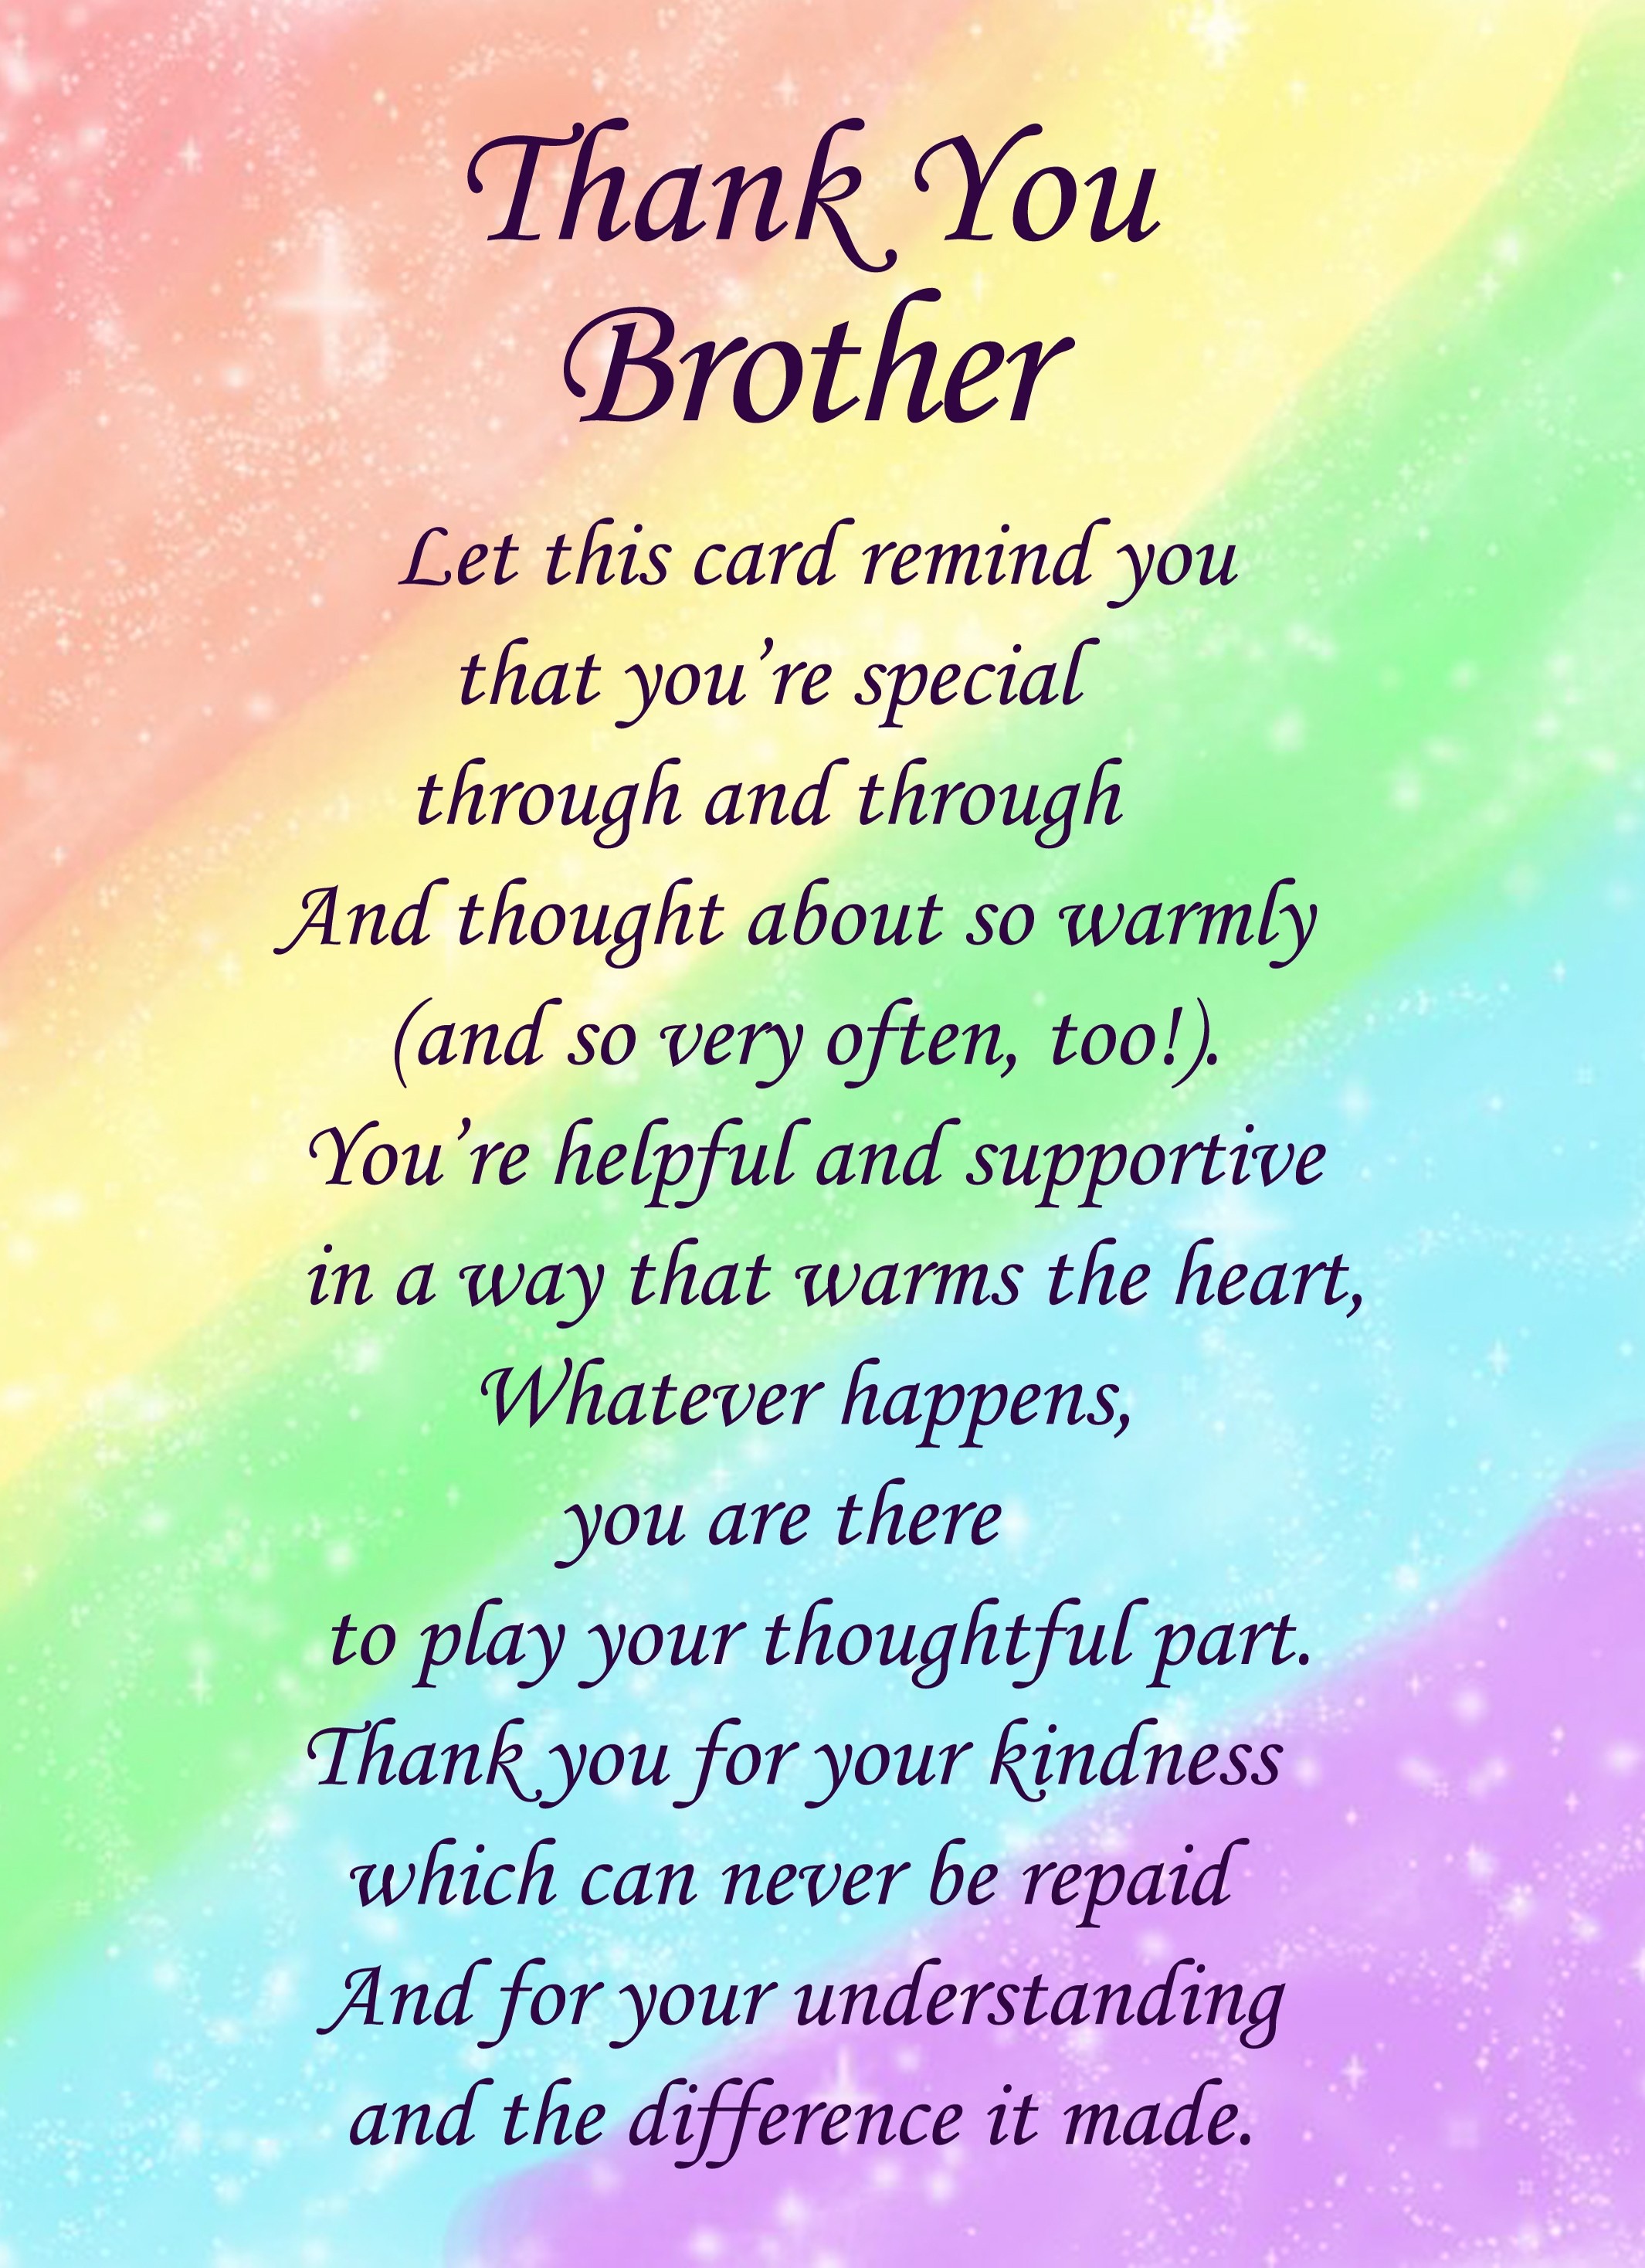 Thank You 'Brother' Poem Verse Greeting Card